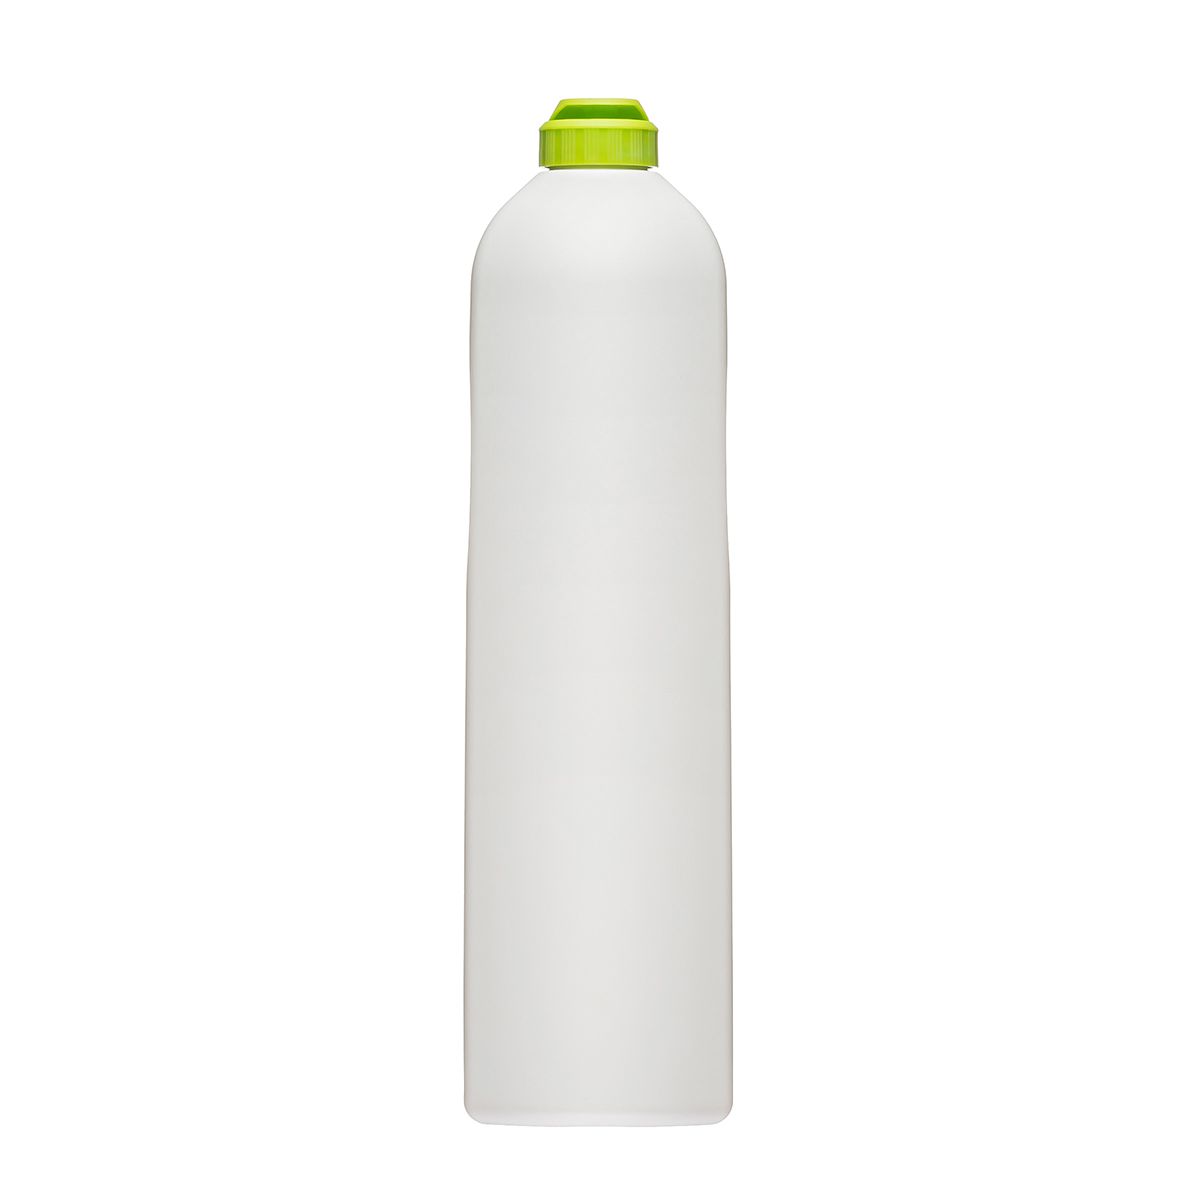 The 500 ml HDPE bottle Grand 500 is perfect choice for any product in household chemicals. by Pack Store Europe, packstore.eu